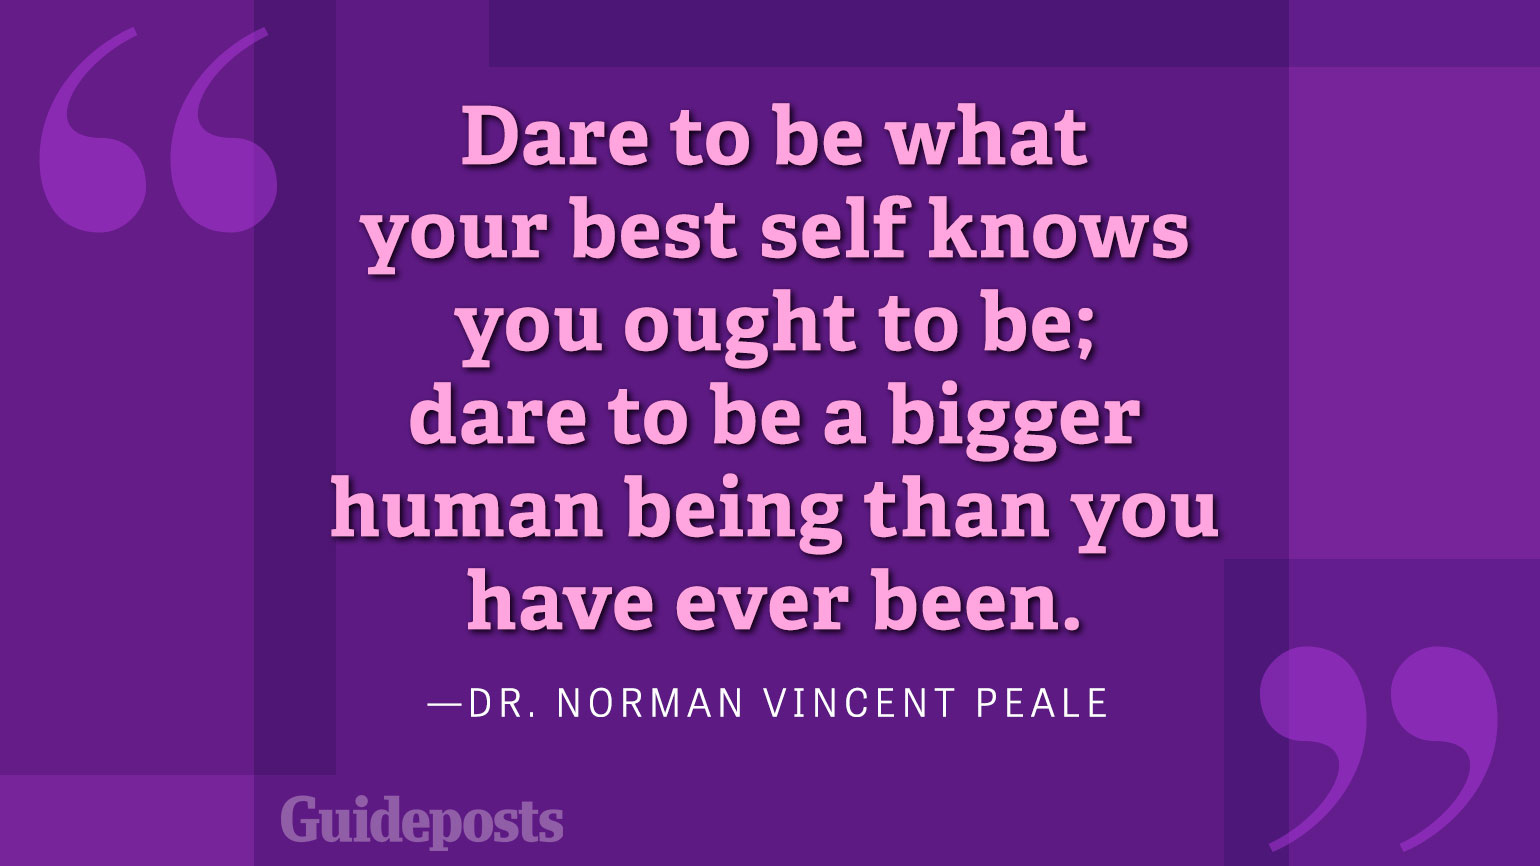 Dare to be what your best self knows you ought to be; dare to be a bigger human being than you ever been.